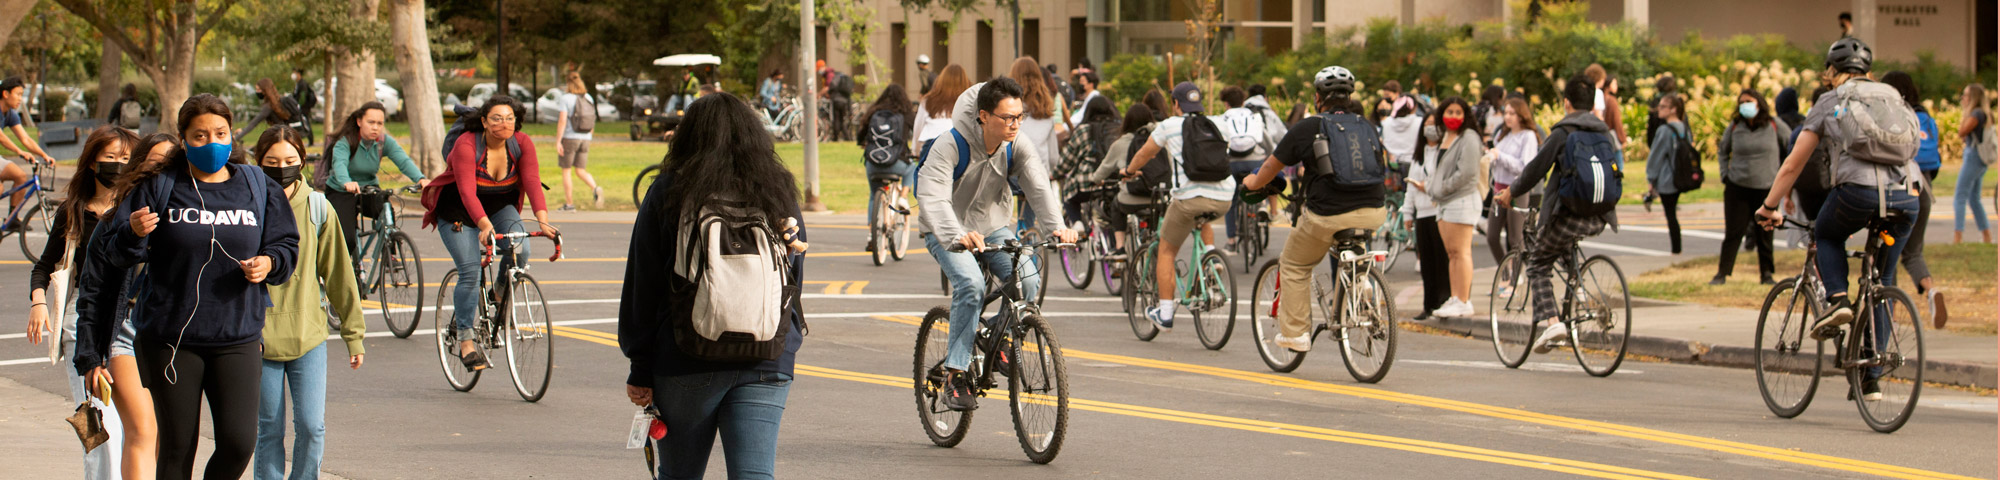 Bustling campus with during the daytime with bicycles and people walking..